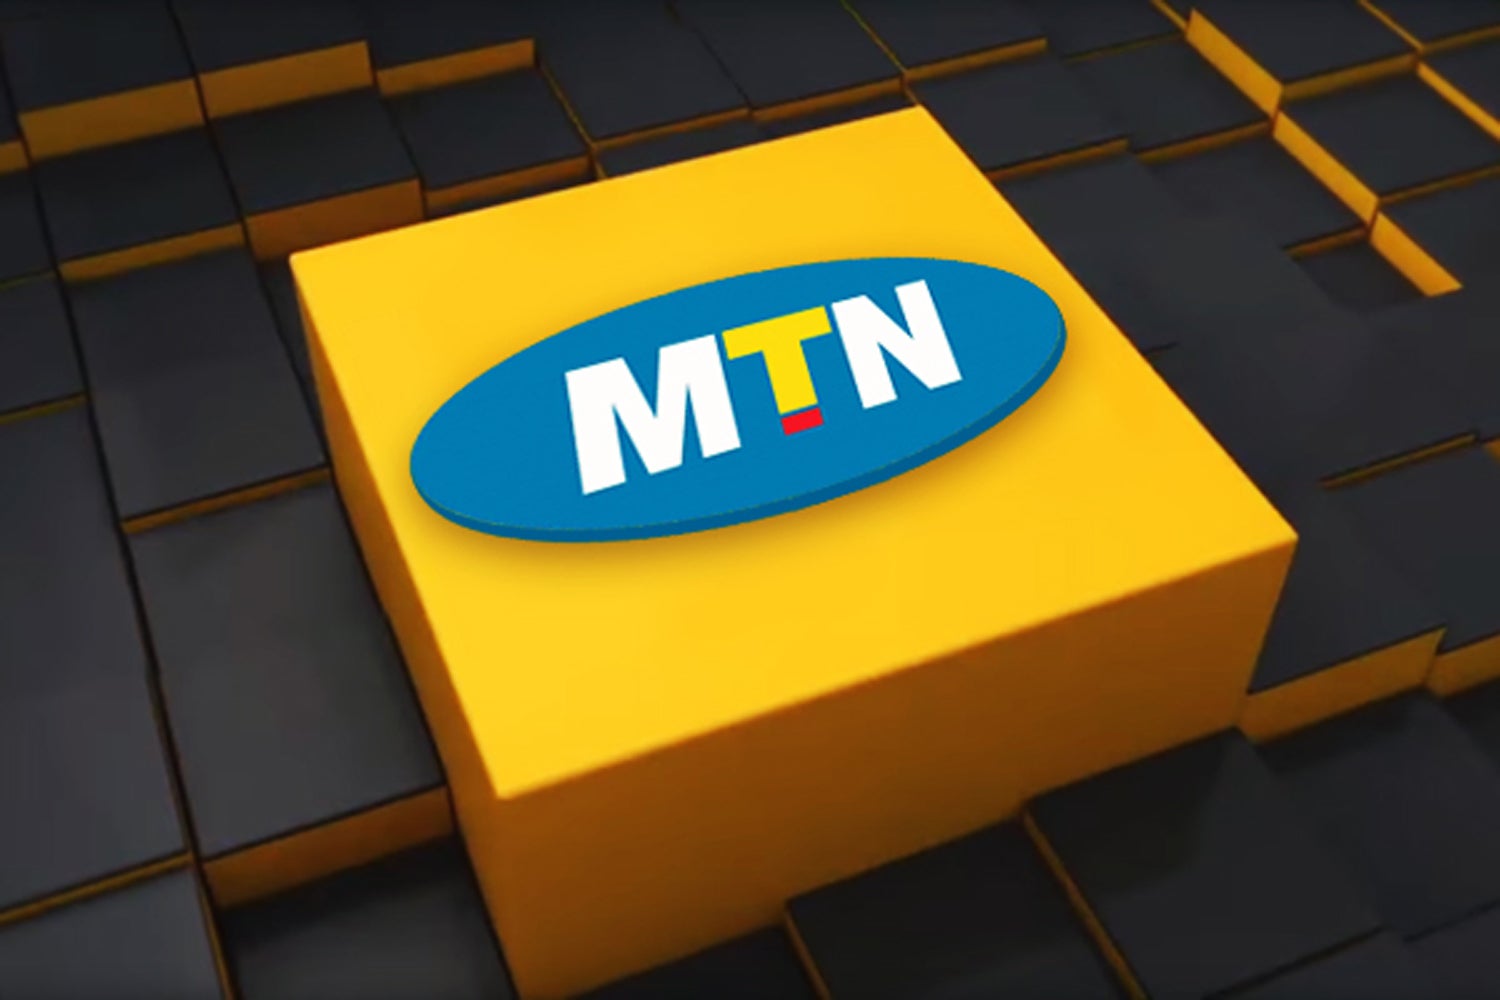 MTN to dedicate $13.3 million relief fund to help fight COVID-19 in Afrca